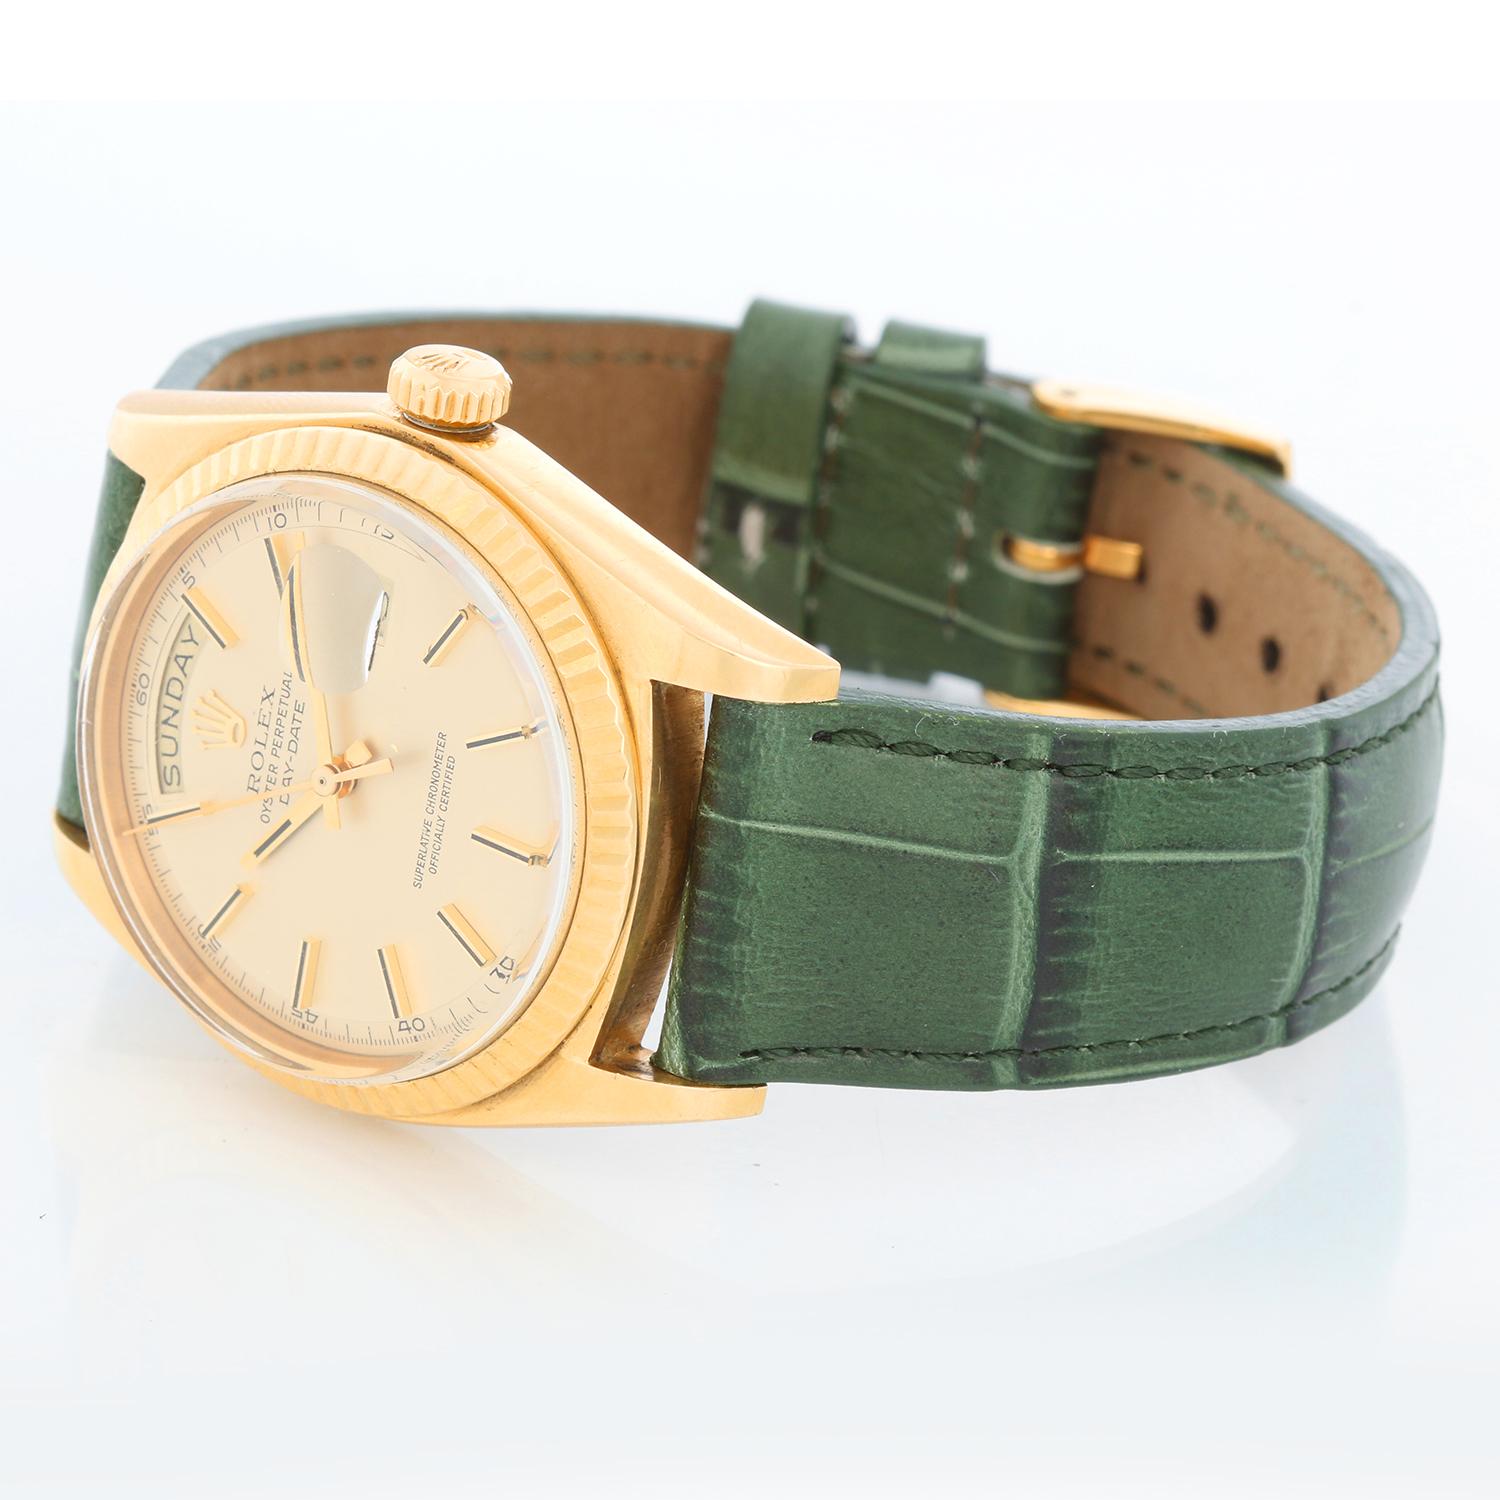 Rolex President Day-Date Men's 18k Yellow Gold Watch 1803 - Automatic winding; 26 jewels, non-quick-set; acrylic crystal. 18k yellow gold case with fluted bezel (36mm diameter). Champagne matte dial with stick hour markers. Leather strap with Rolex